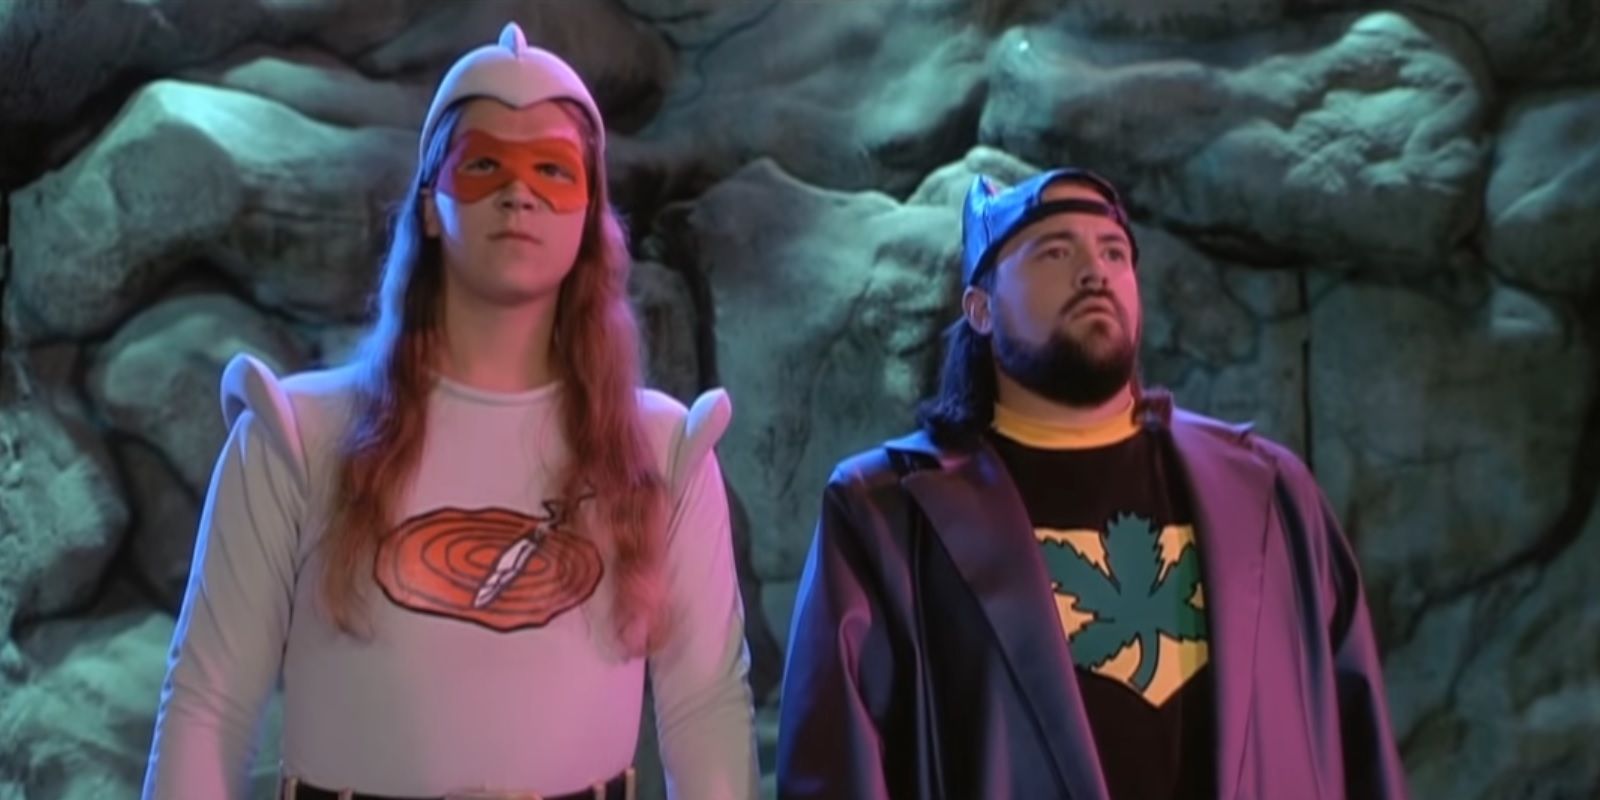 Jason Mewes and Kevin Smith as Bluntman and Chronic in &quot;Jay and Silent Bob Strike Back&quot;